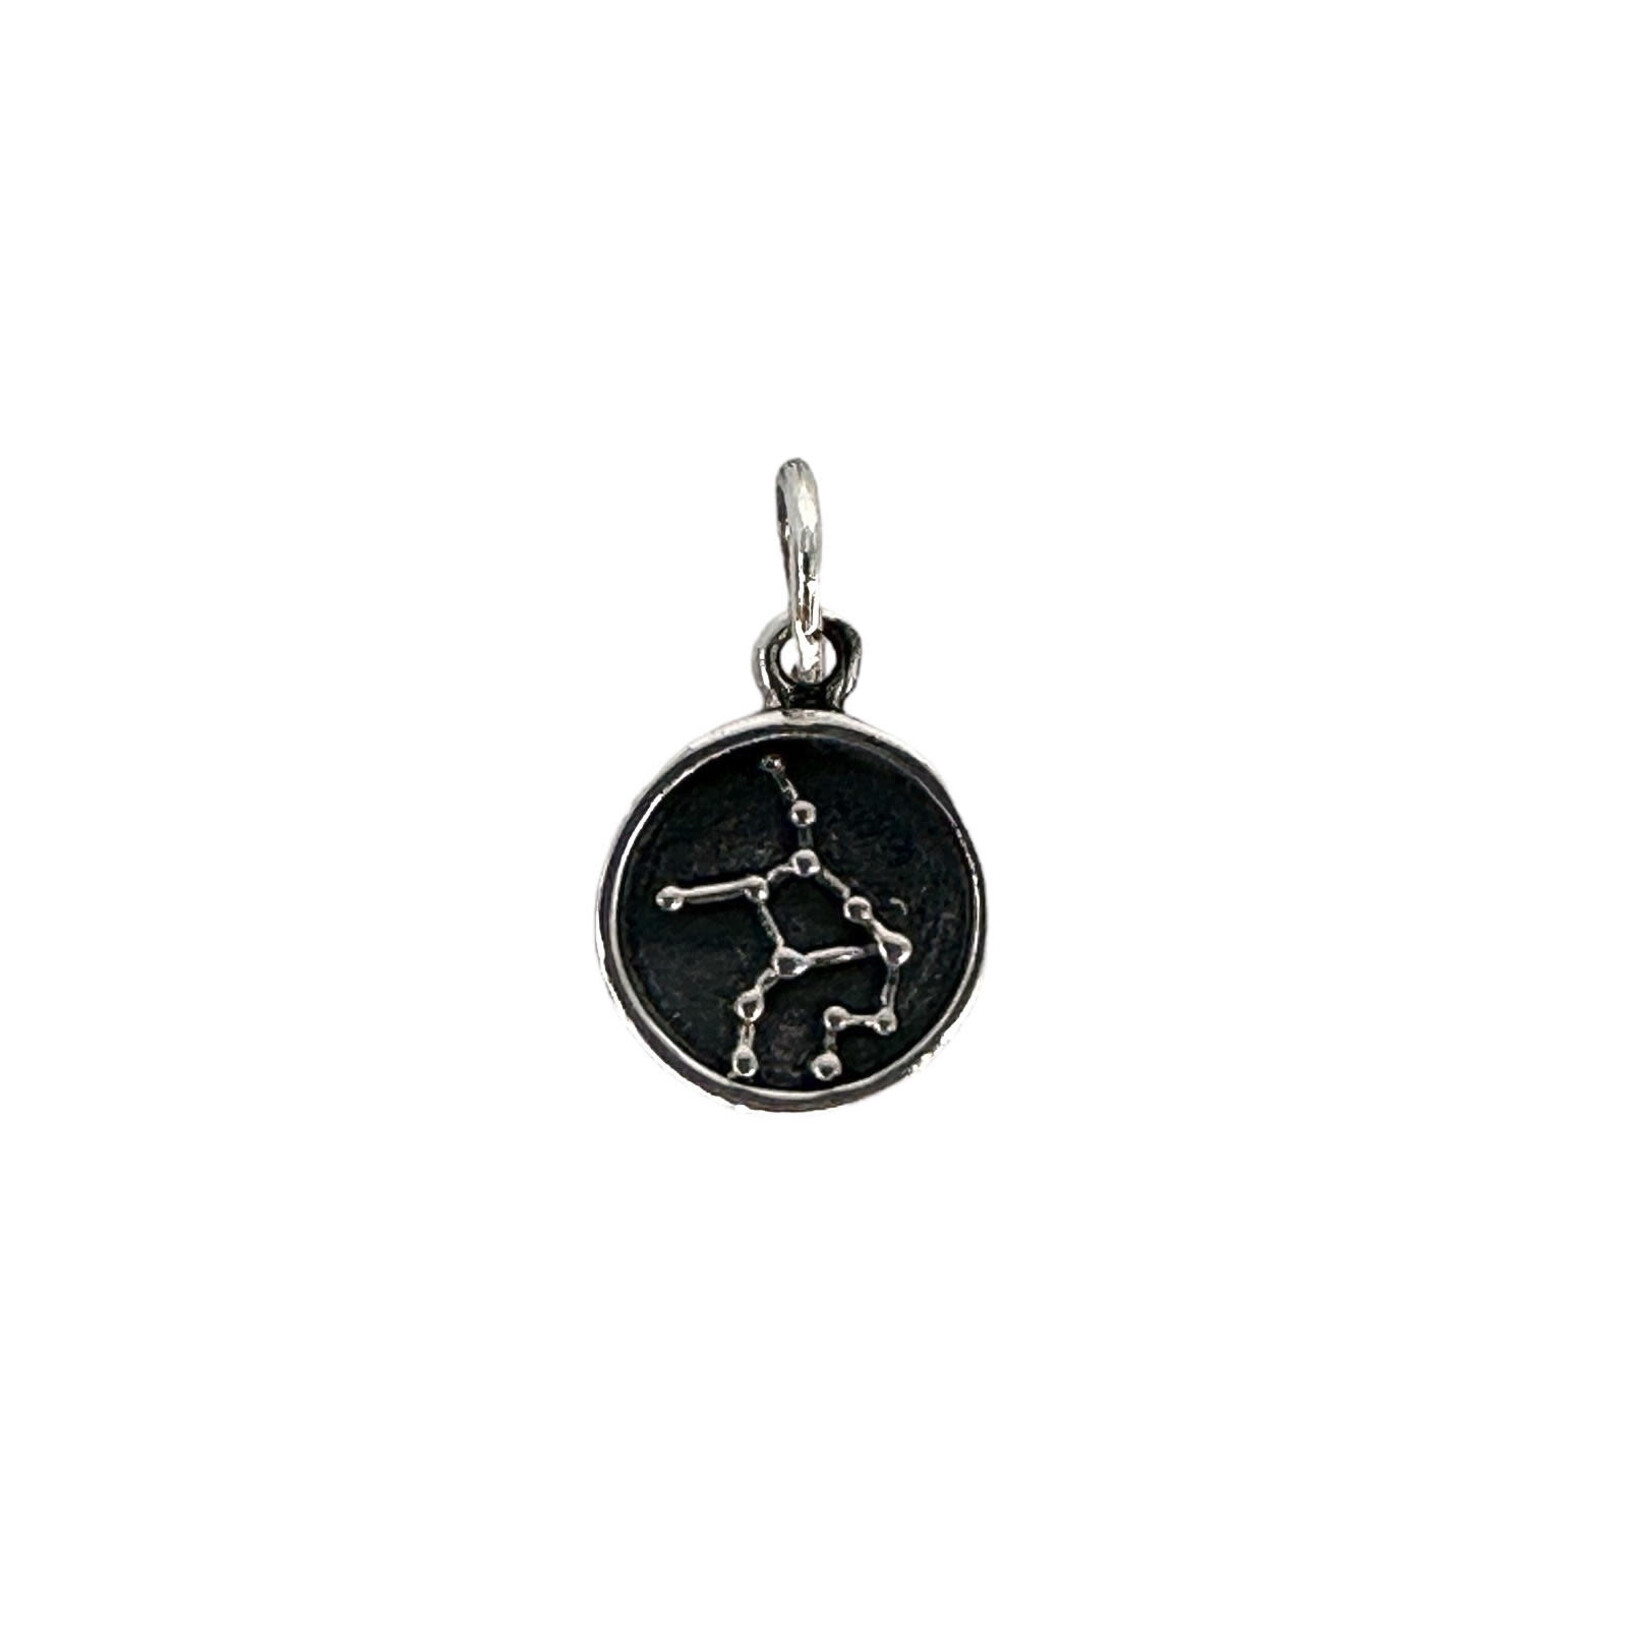 P409 Sterling Silver Virgo Zodiac Sign and Constellation Reversible Pendant